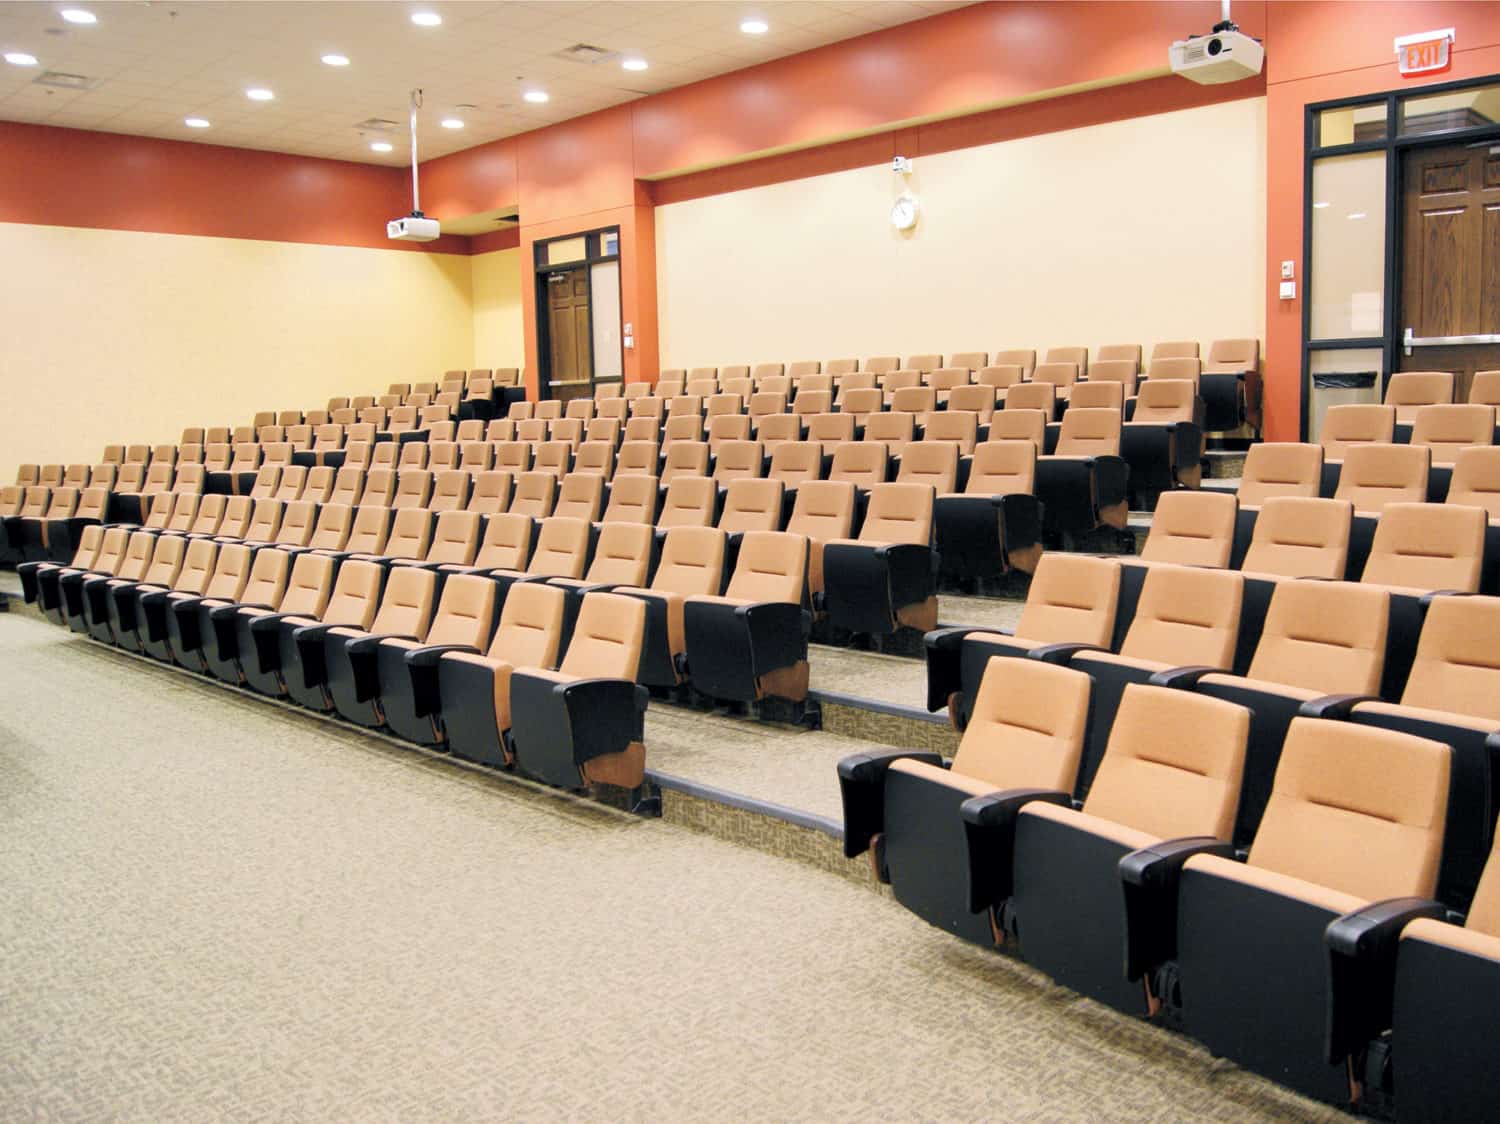 Clarity Auditorium Seating with tablet arms shown in a lecture hall